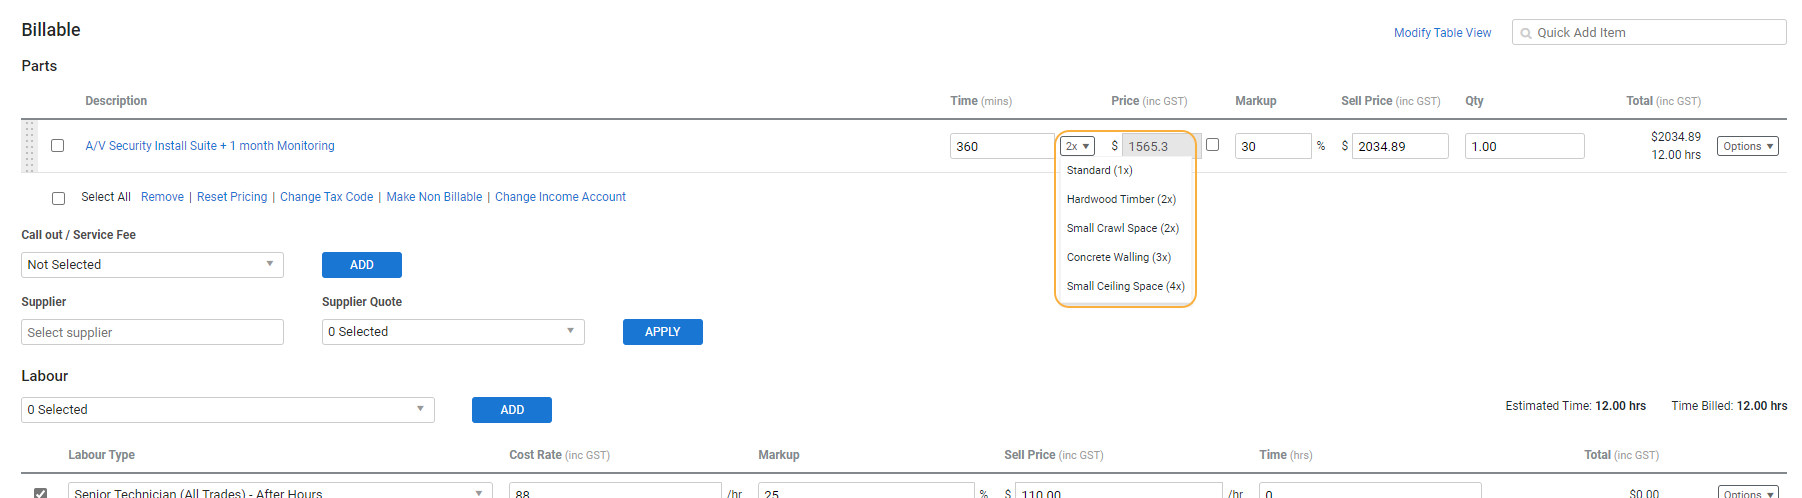 A screenshot of the Fit Time drop-down in the Billable sub-tab.